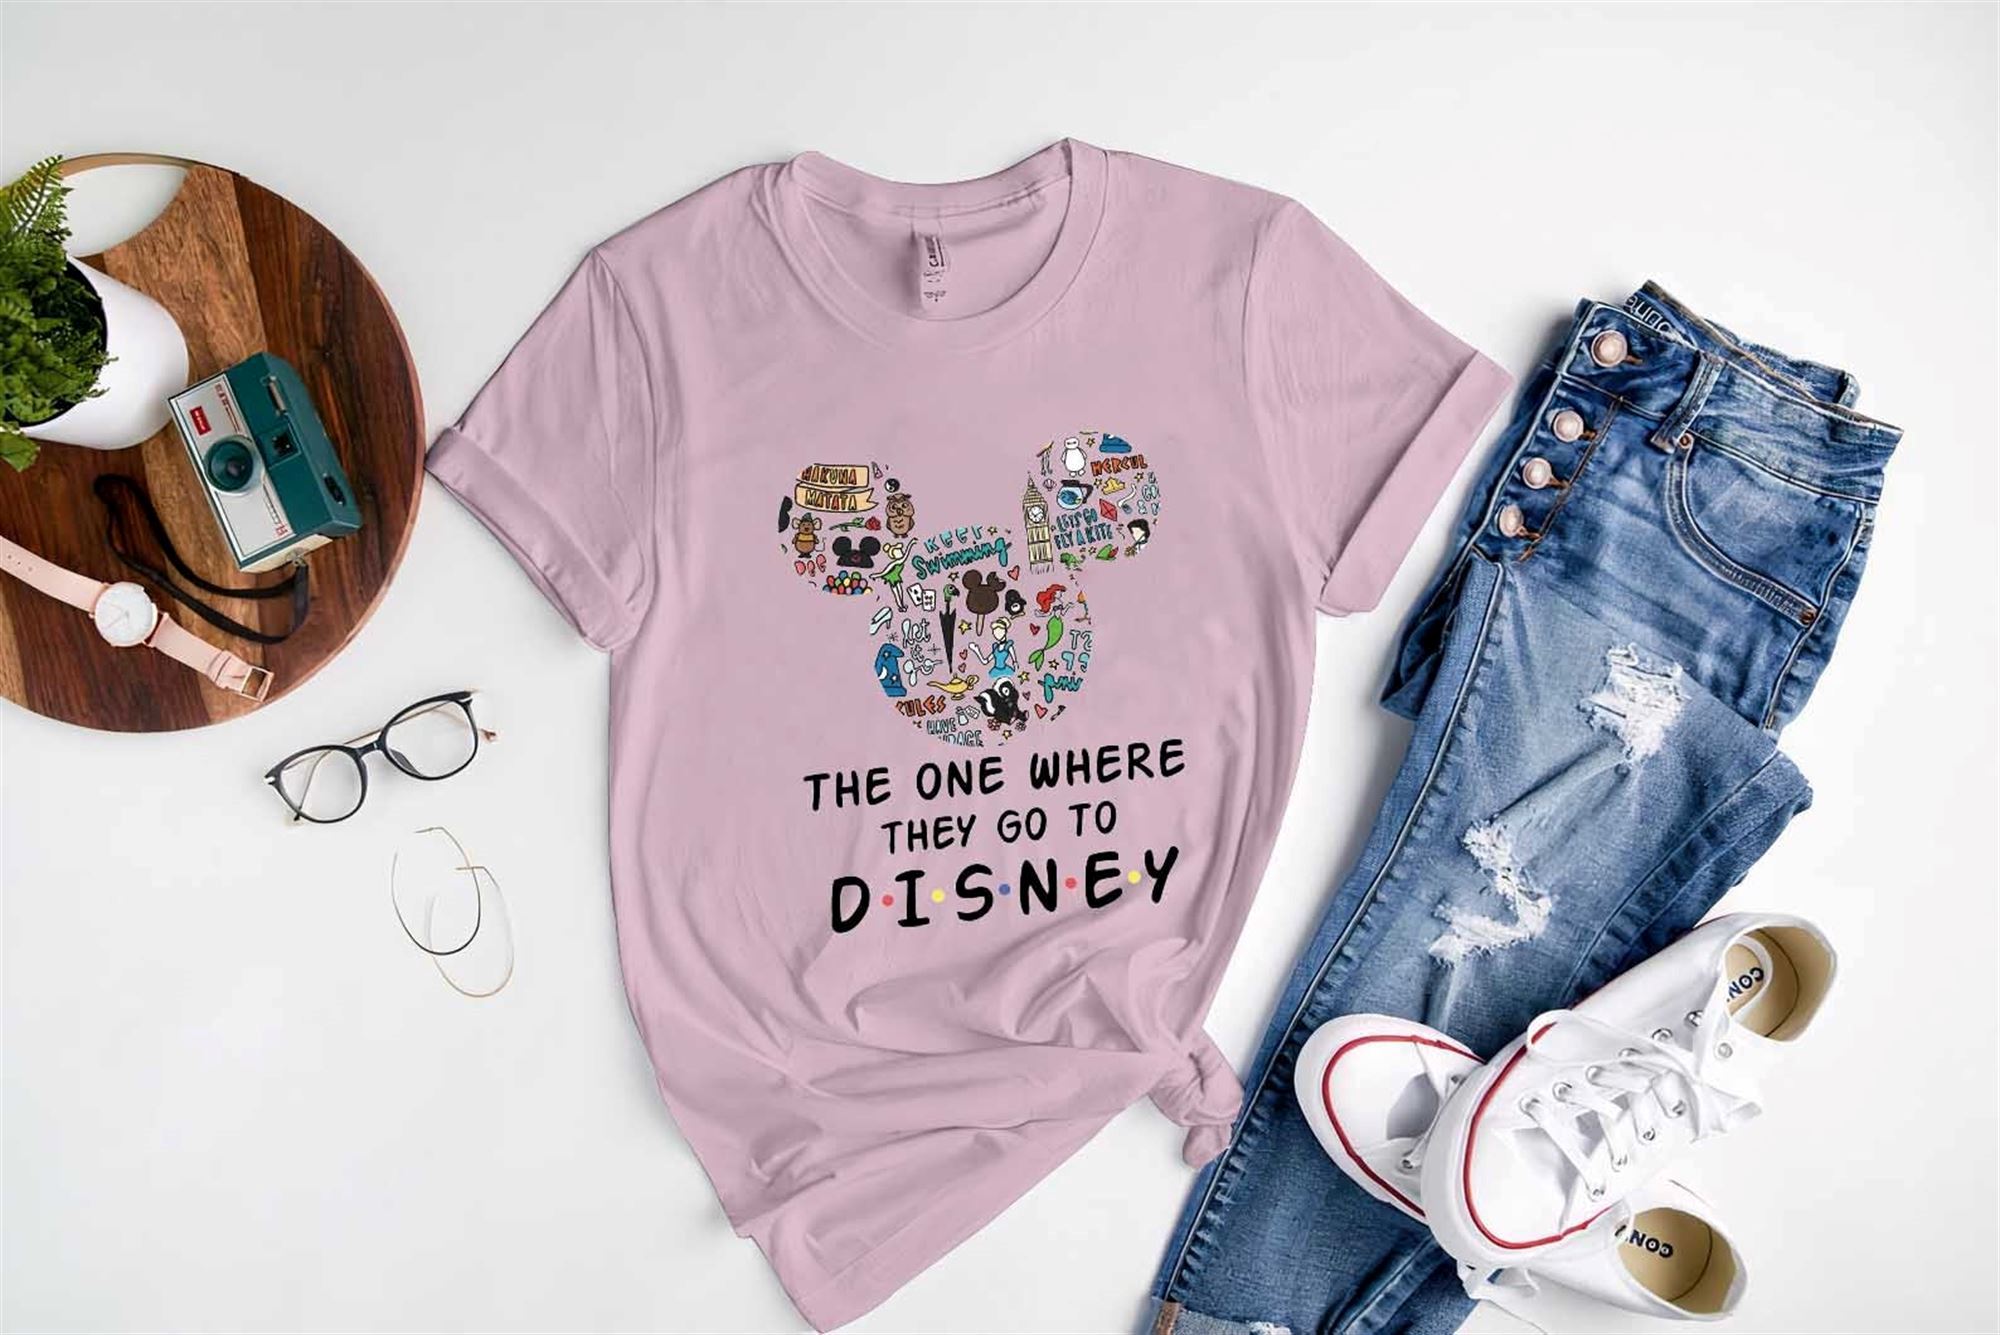 Attractive The One Where They Go To Disney Shirt Disney Characters Shirt Friend Tv Show Shirt Walt Disney Shirt Disney Worldmickey Mouse Shirt Tm2 